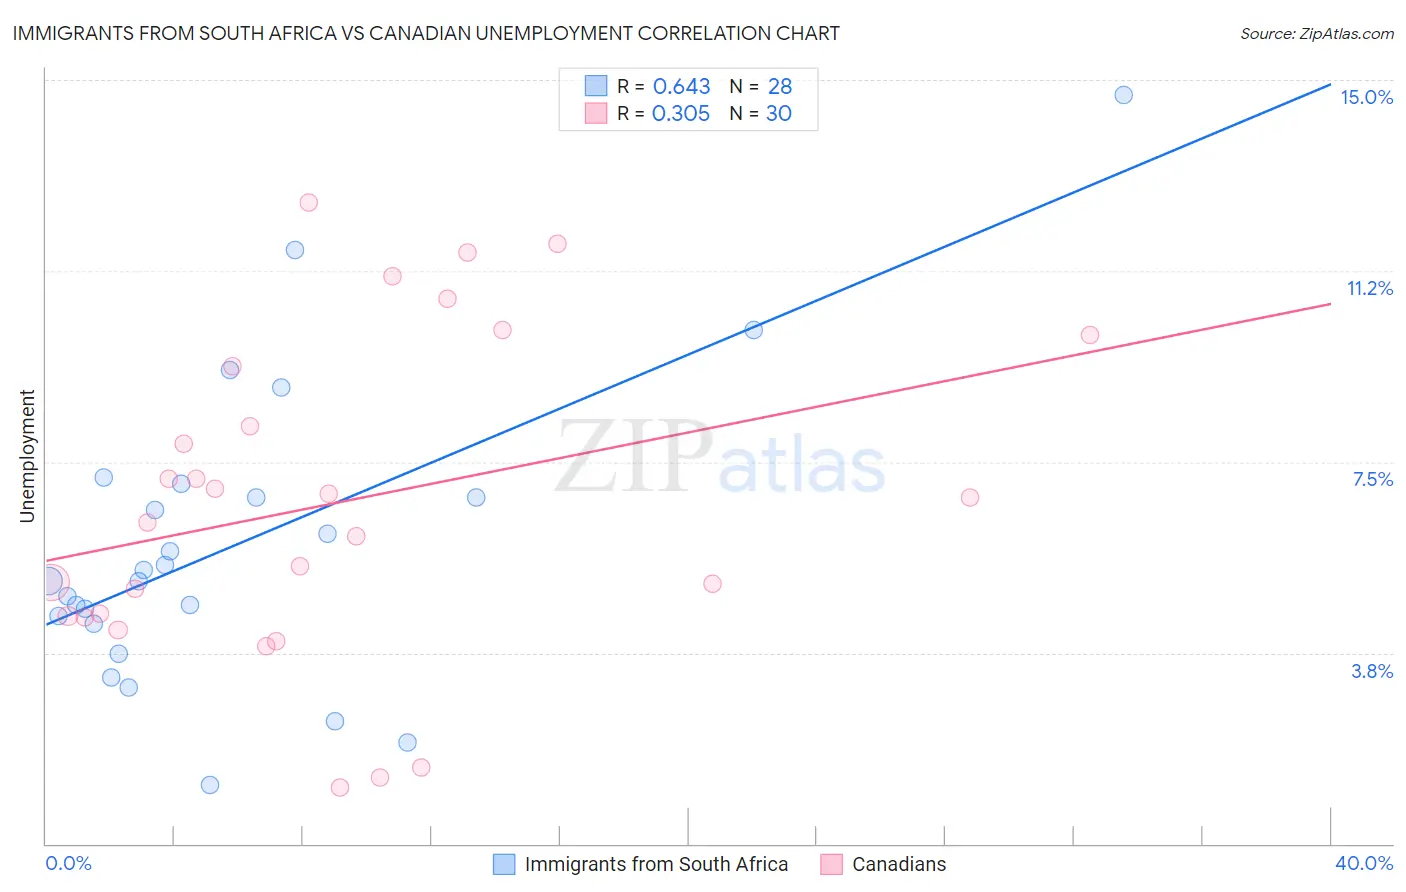 Immigrants from South Africa vs Canadian Unemployment